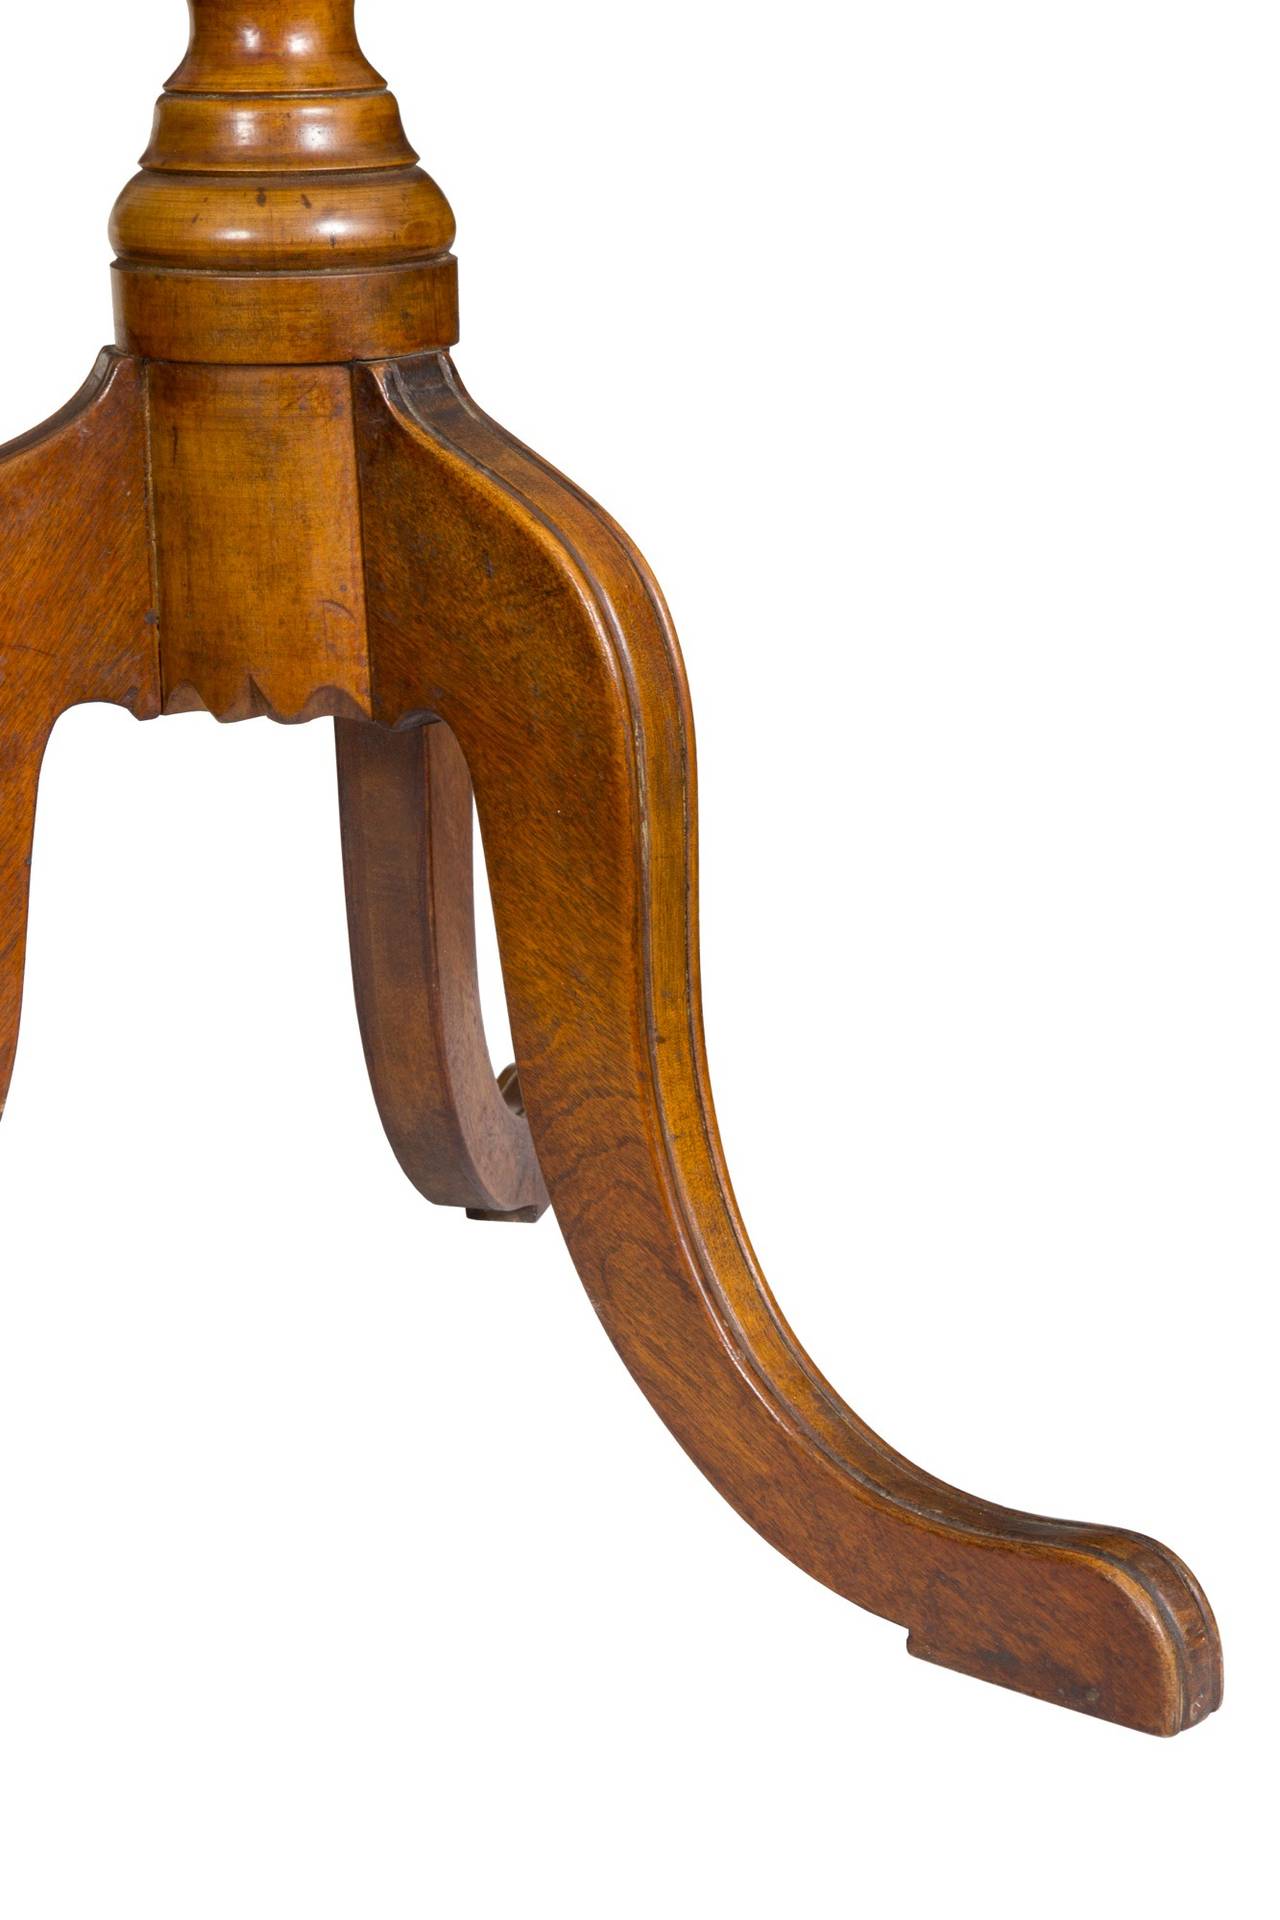 Birch Federal Candle Stand with Notched Corners, circa 1820 im Zustand „Hervorragend“ im Angebot in Providence, RI